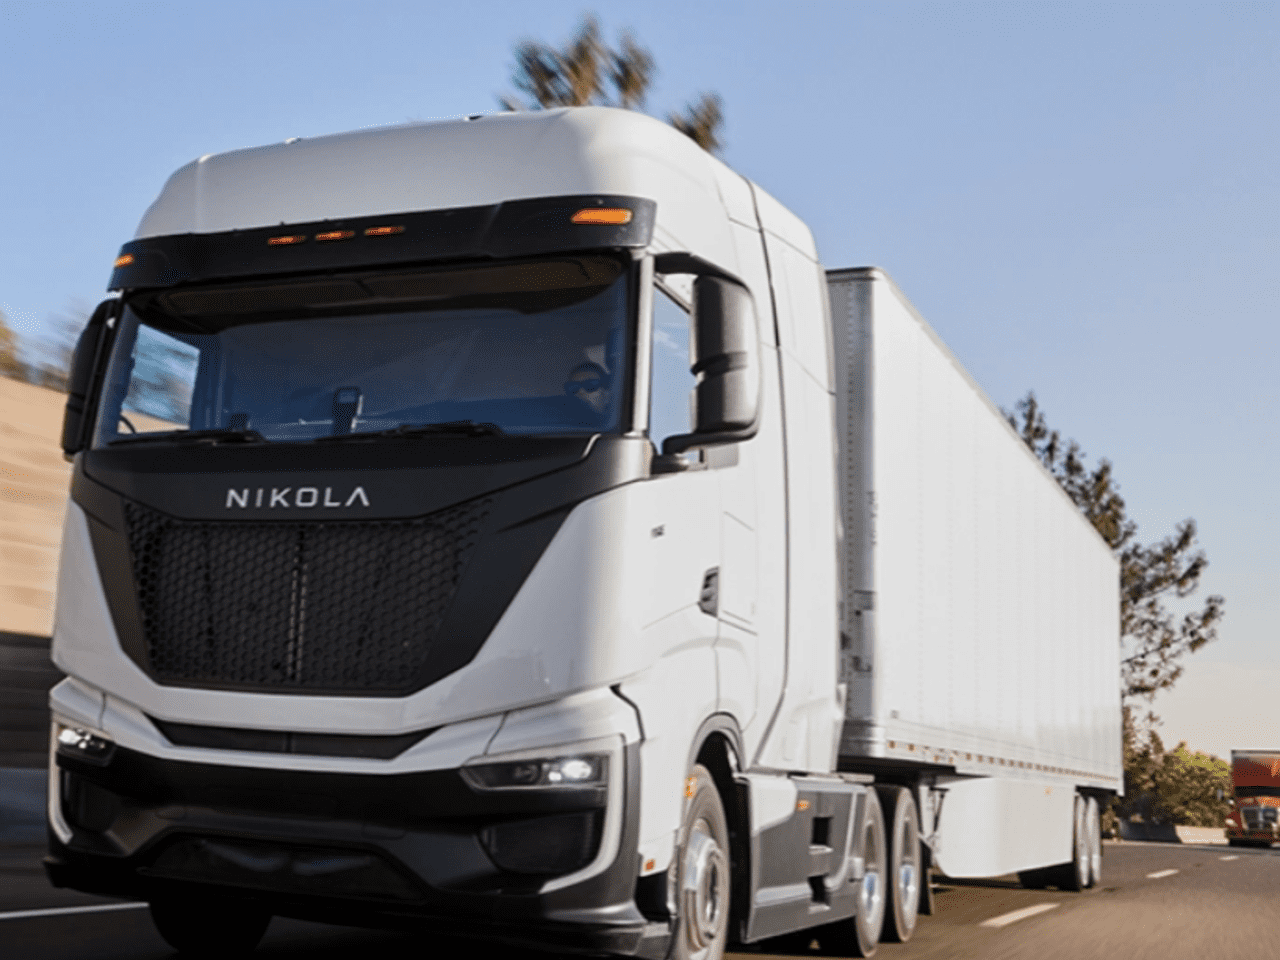 Nikola sold 72 hydrogen-fuel-cell trucks to retailers in second quarter, topping 60-unit guidance